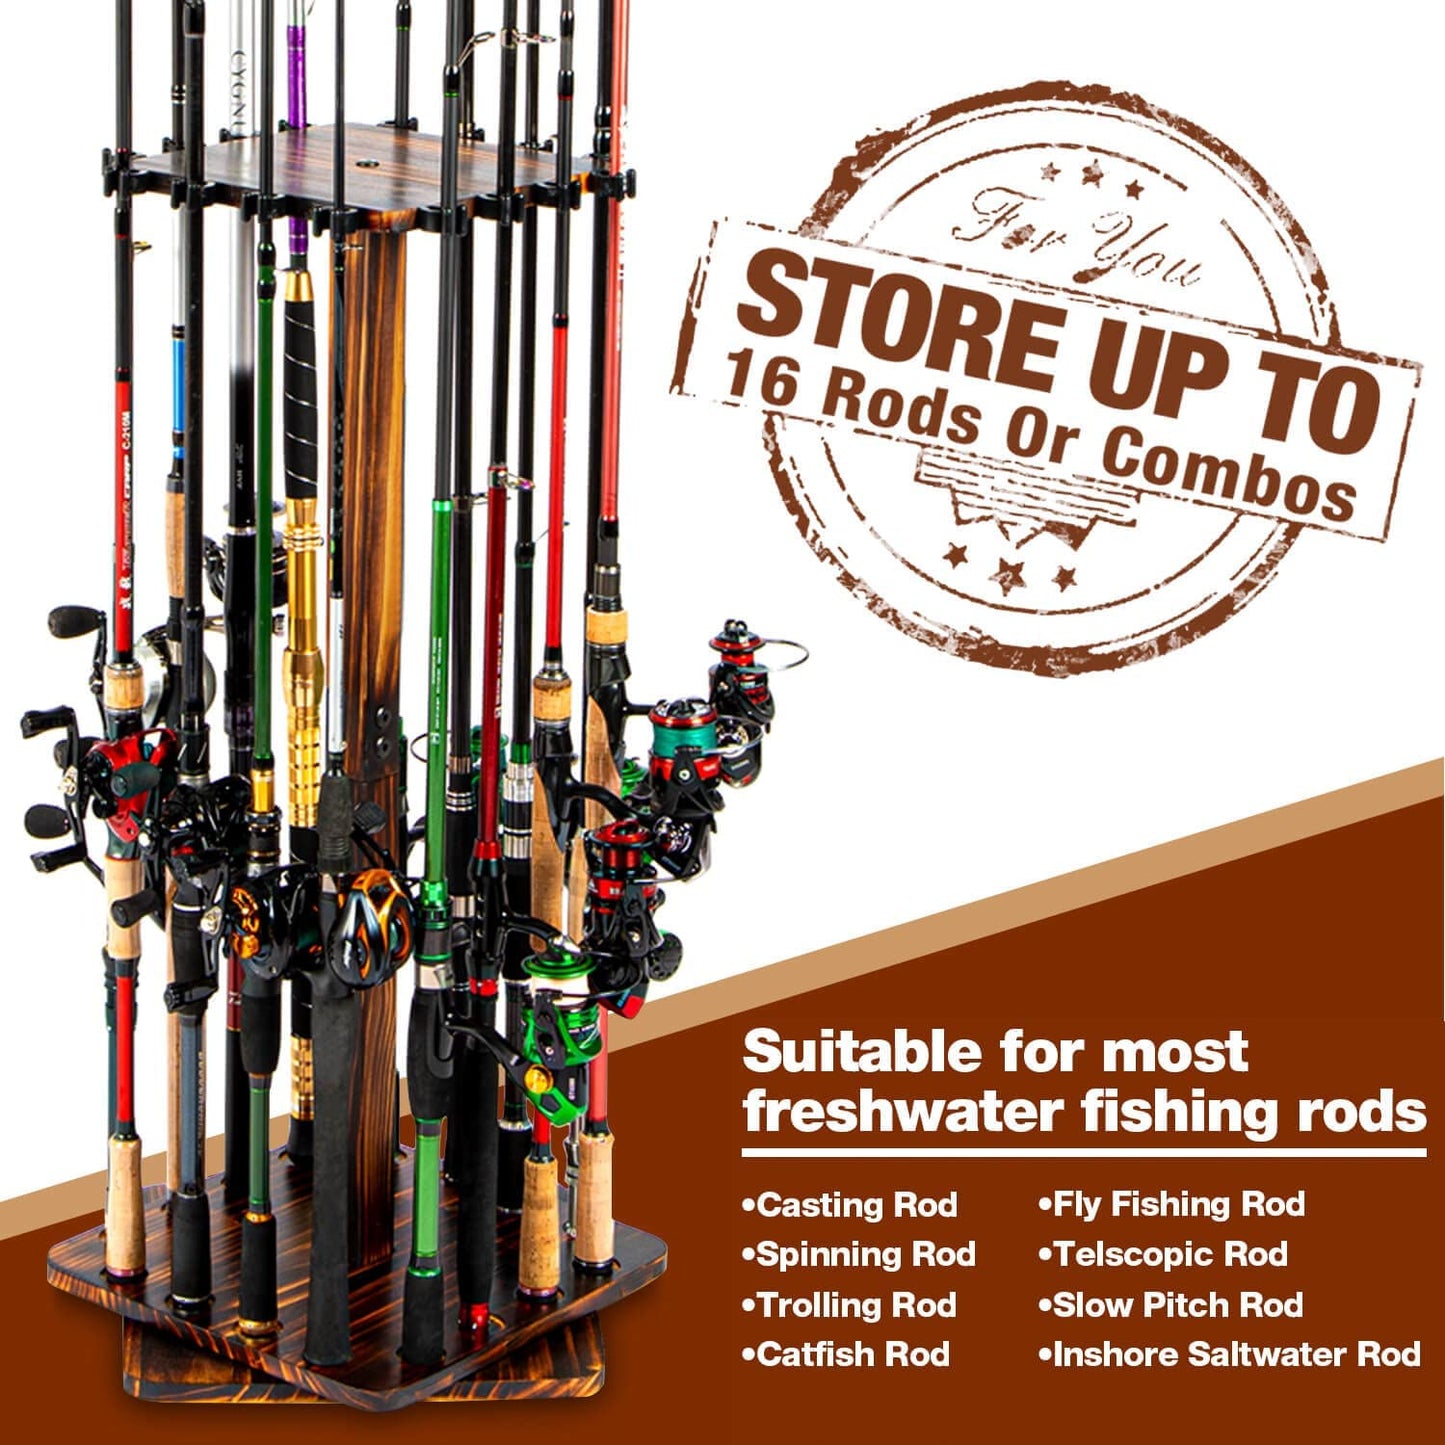 360 Degree Rotating Fishing Pole Rack Fishing Rod Holders for Garage Holds up to 16 Rods